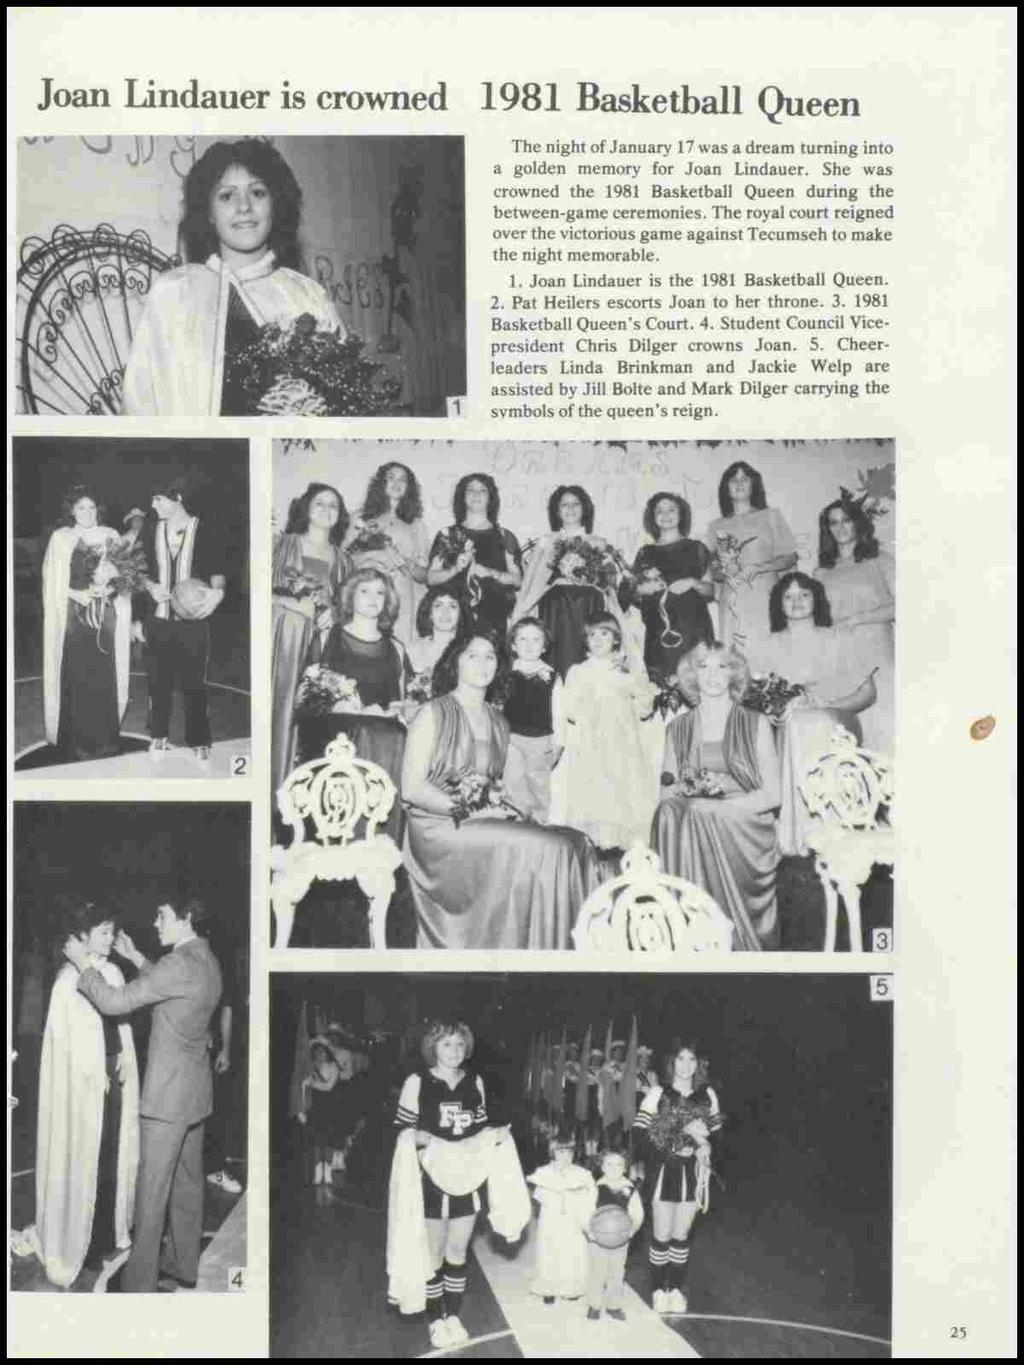 Joan Lindauer is crowned 1981 Basketball Queen The night of January 17 was a dream turning into a golden memory for Joan Lindauer.